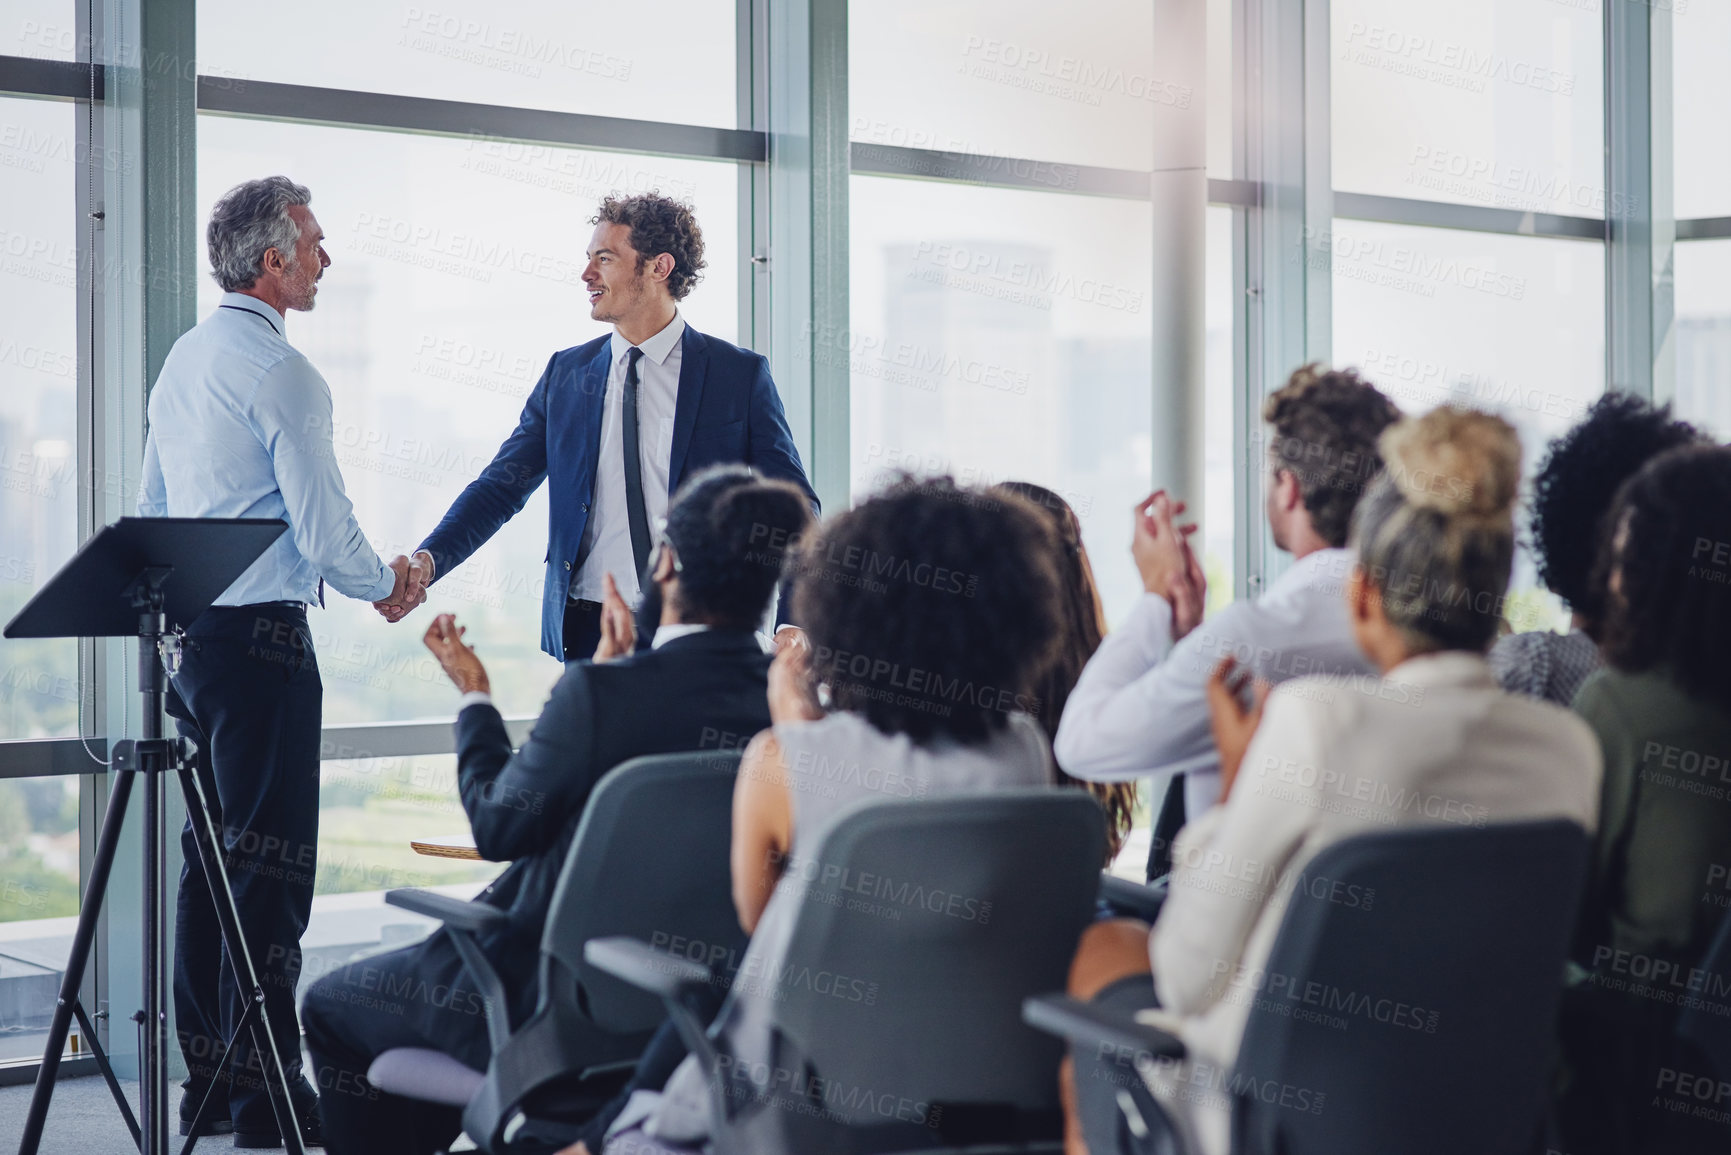 Buy stock photo Cropped shot of two businessmen shaking hands during a seminar in the conference room